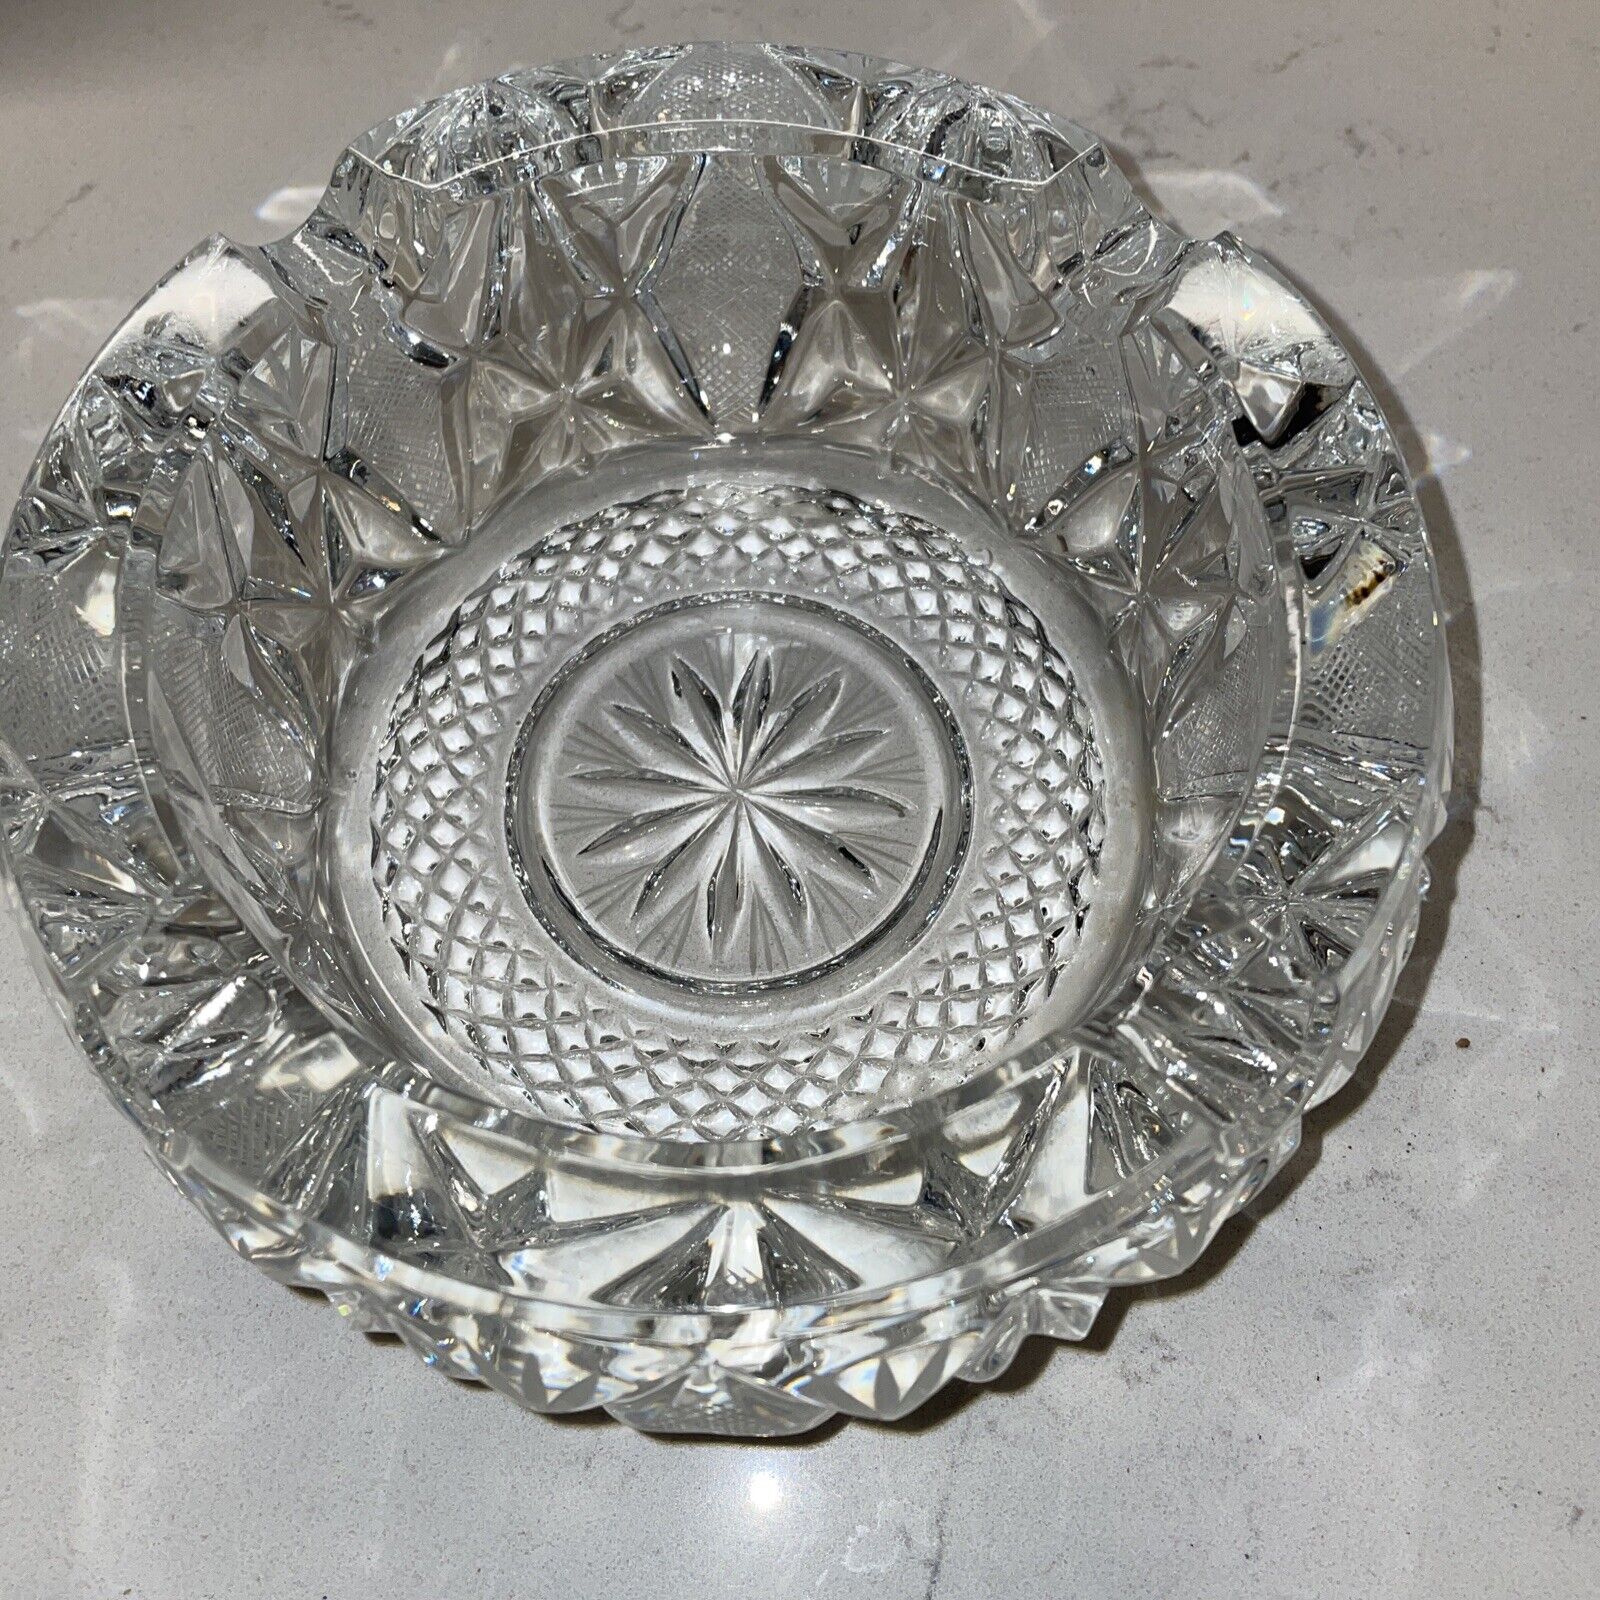 Vintage Cigarette Ashtray Heavy Crystal Clear Cut Etched Glass Heavy Over 2 Lb